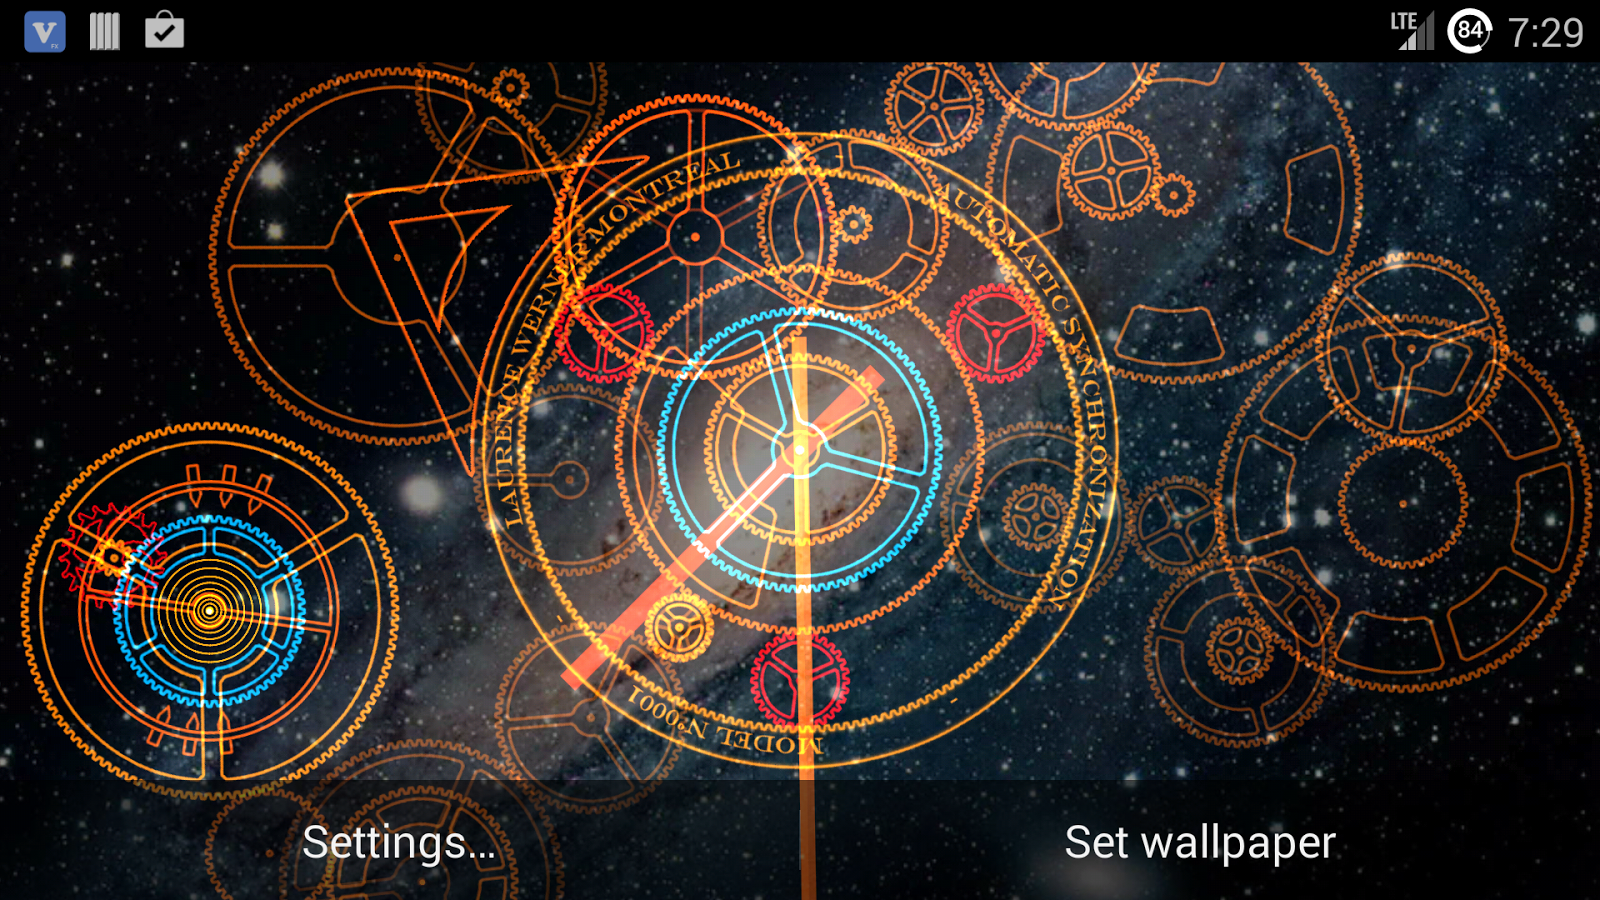 hypno clock live wallpaper is a live wallpaper portraying an abstract 1600x900